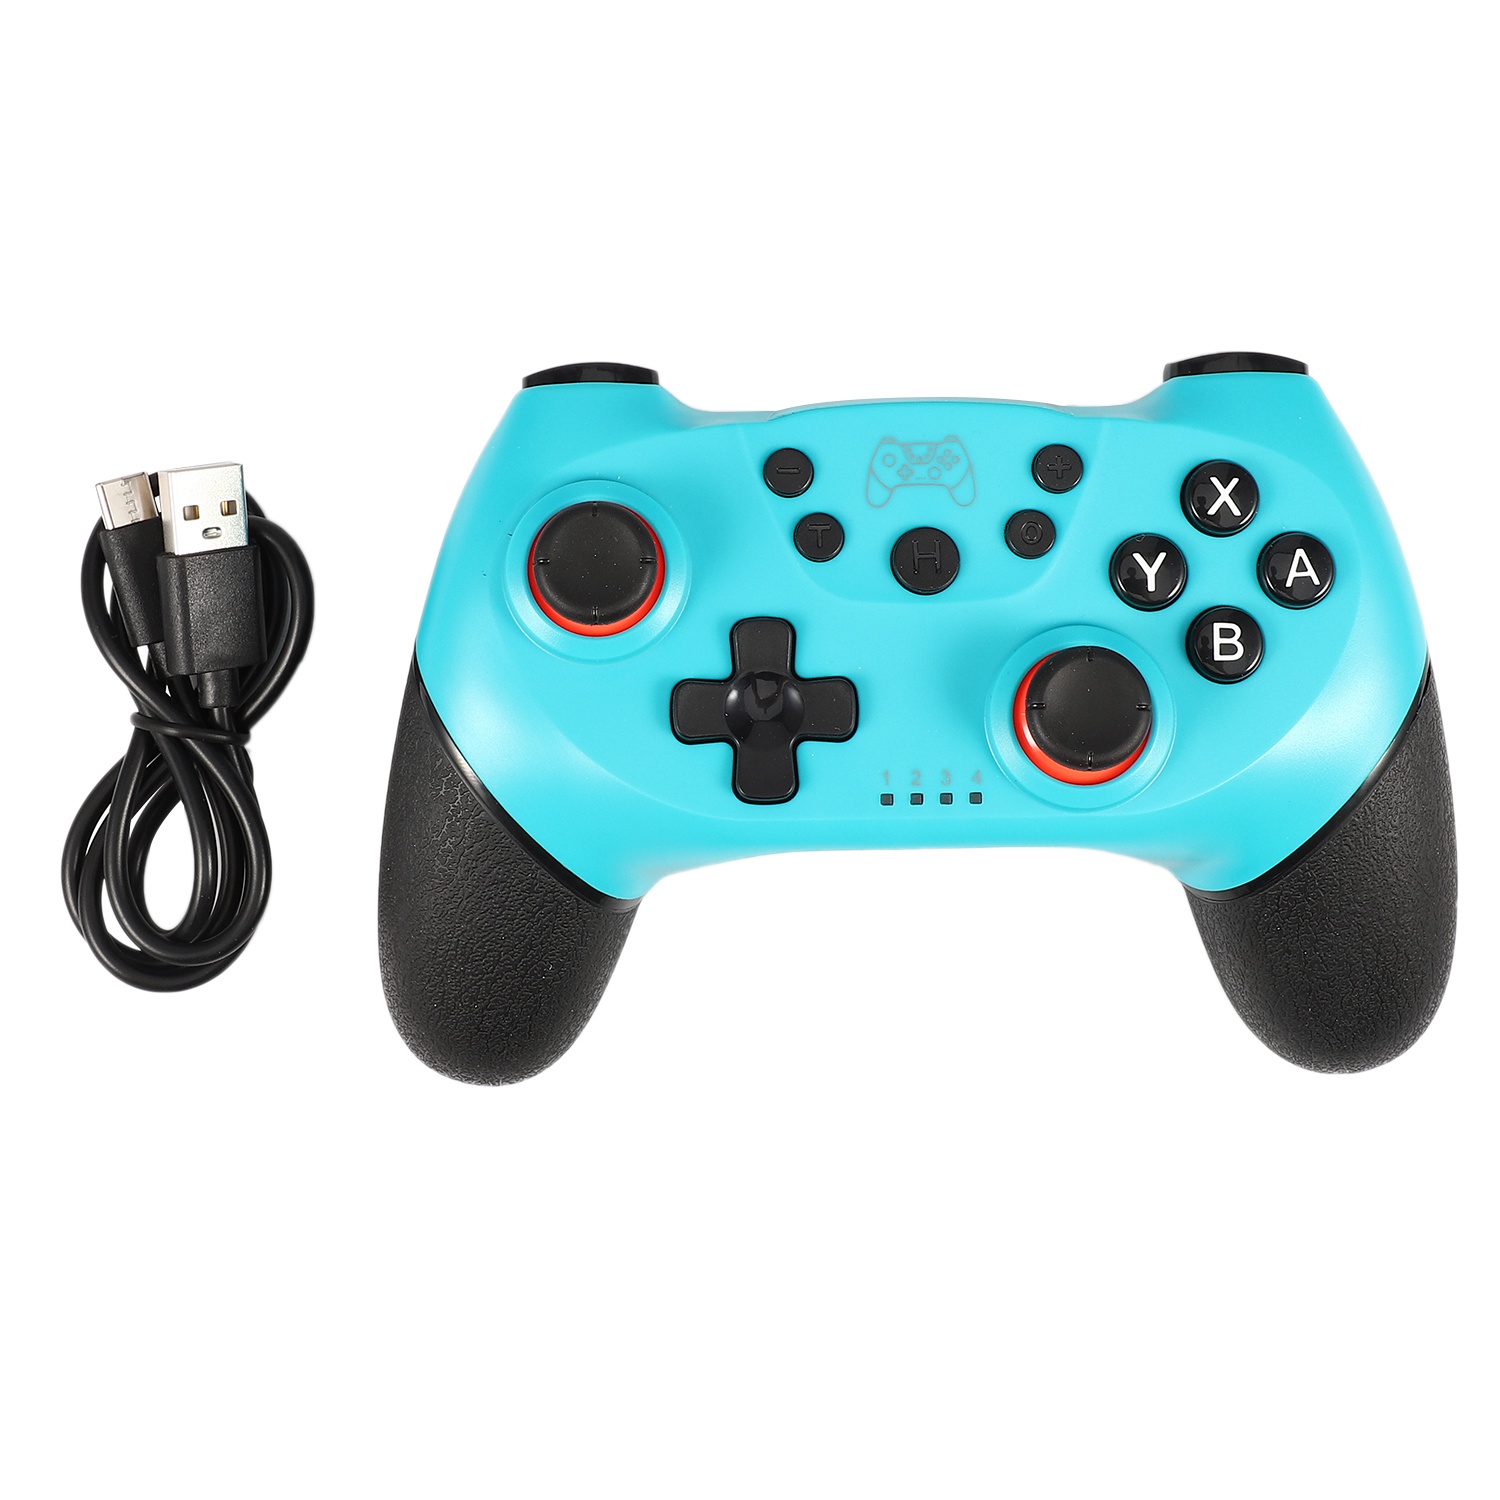 switch pro controller bluetooth version